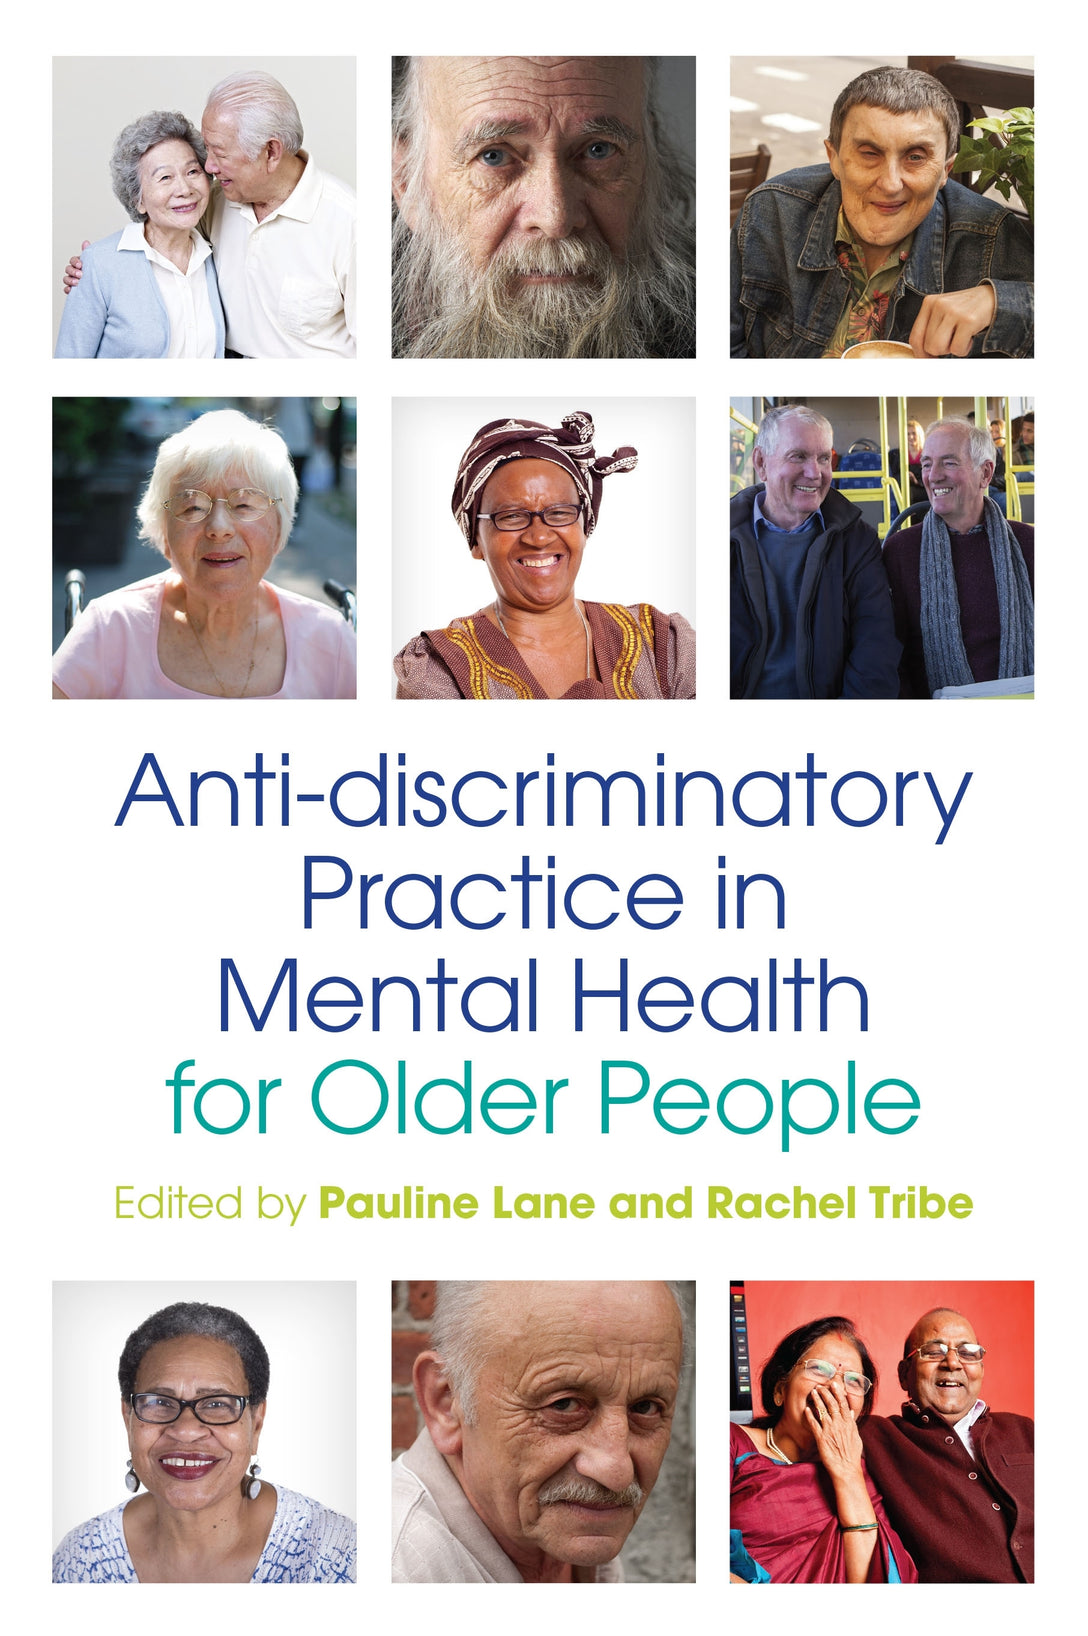 Anti-discriminatory Practice in Mental Health Care for Older People by No Author Listed, Pauline Lane, Rachel Tribe